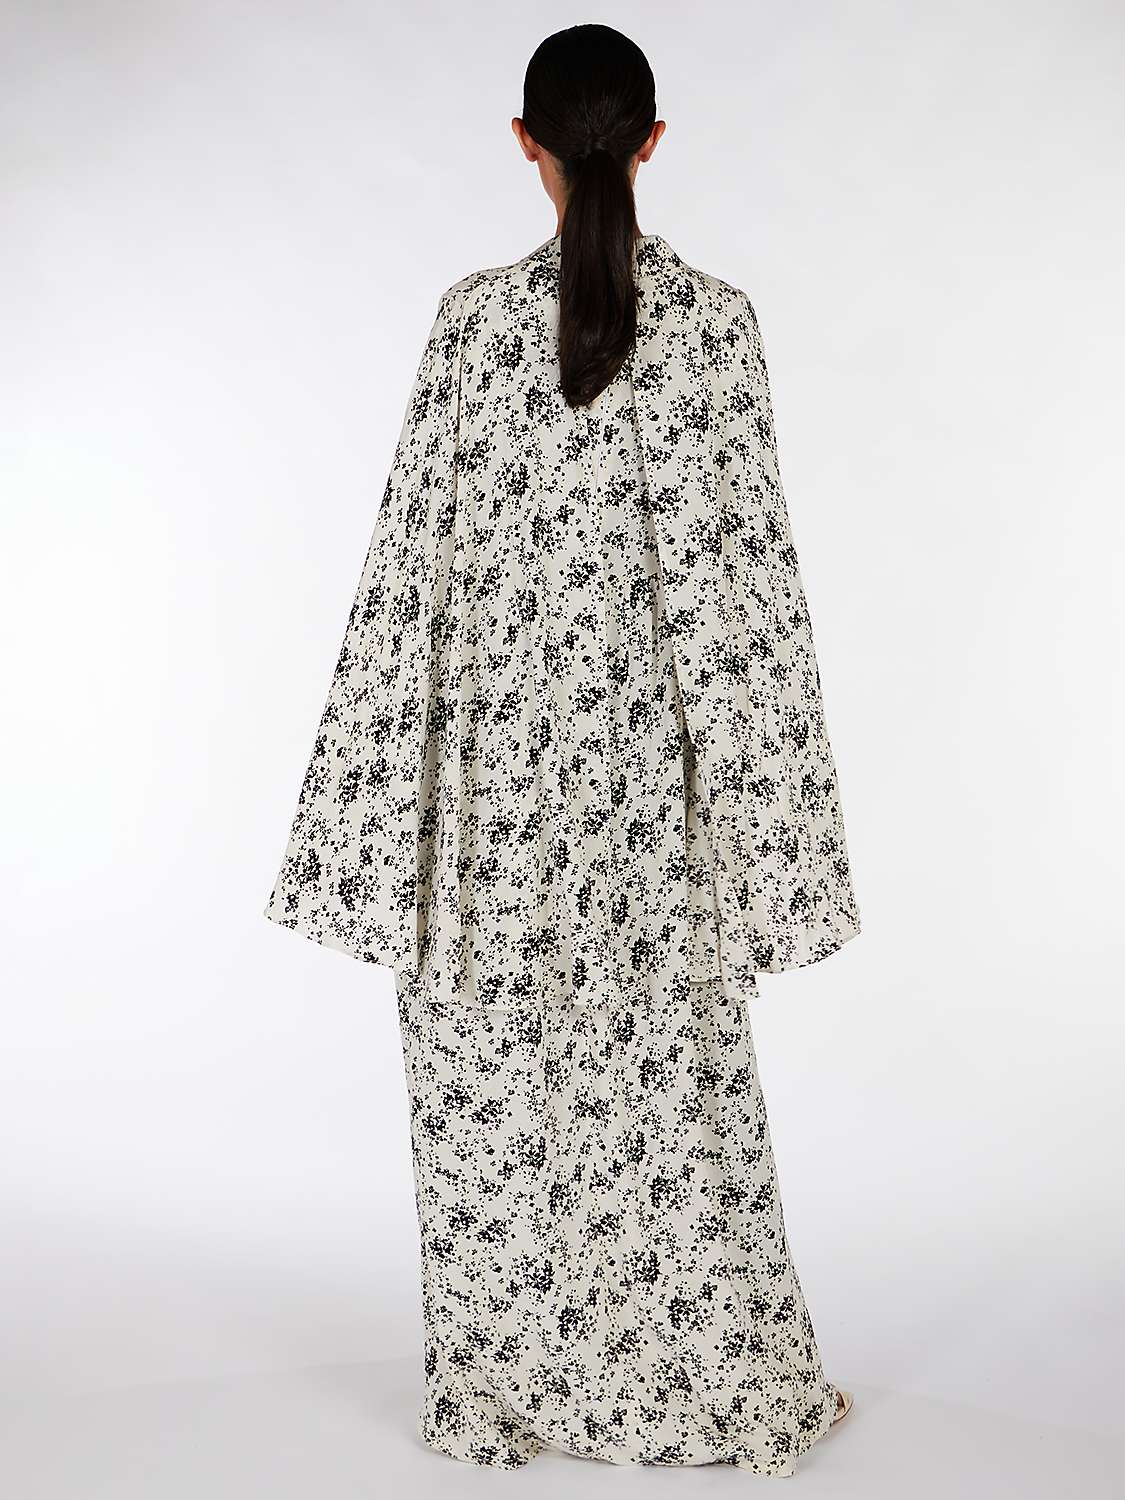 Buy Aab Butterfly Sleeve Maxi Dress, Black/Multi Online at johnlewis.com